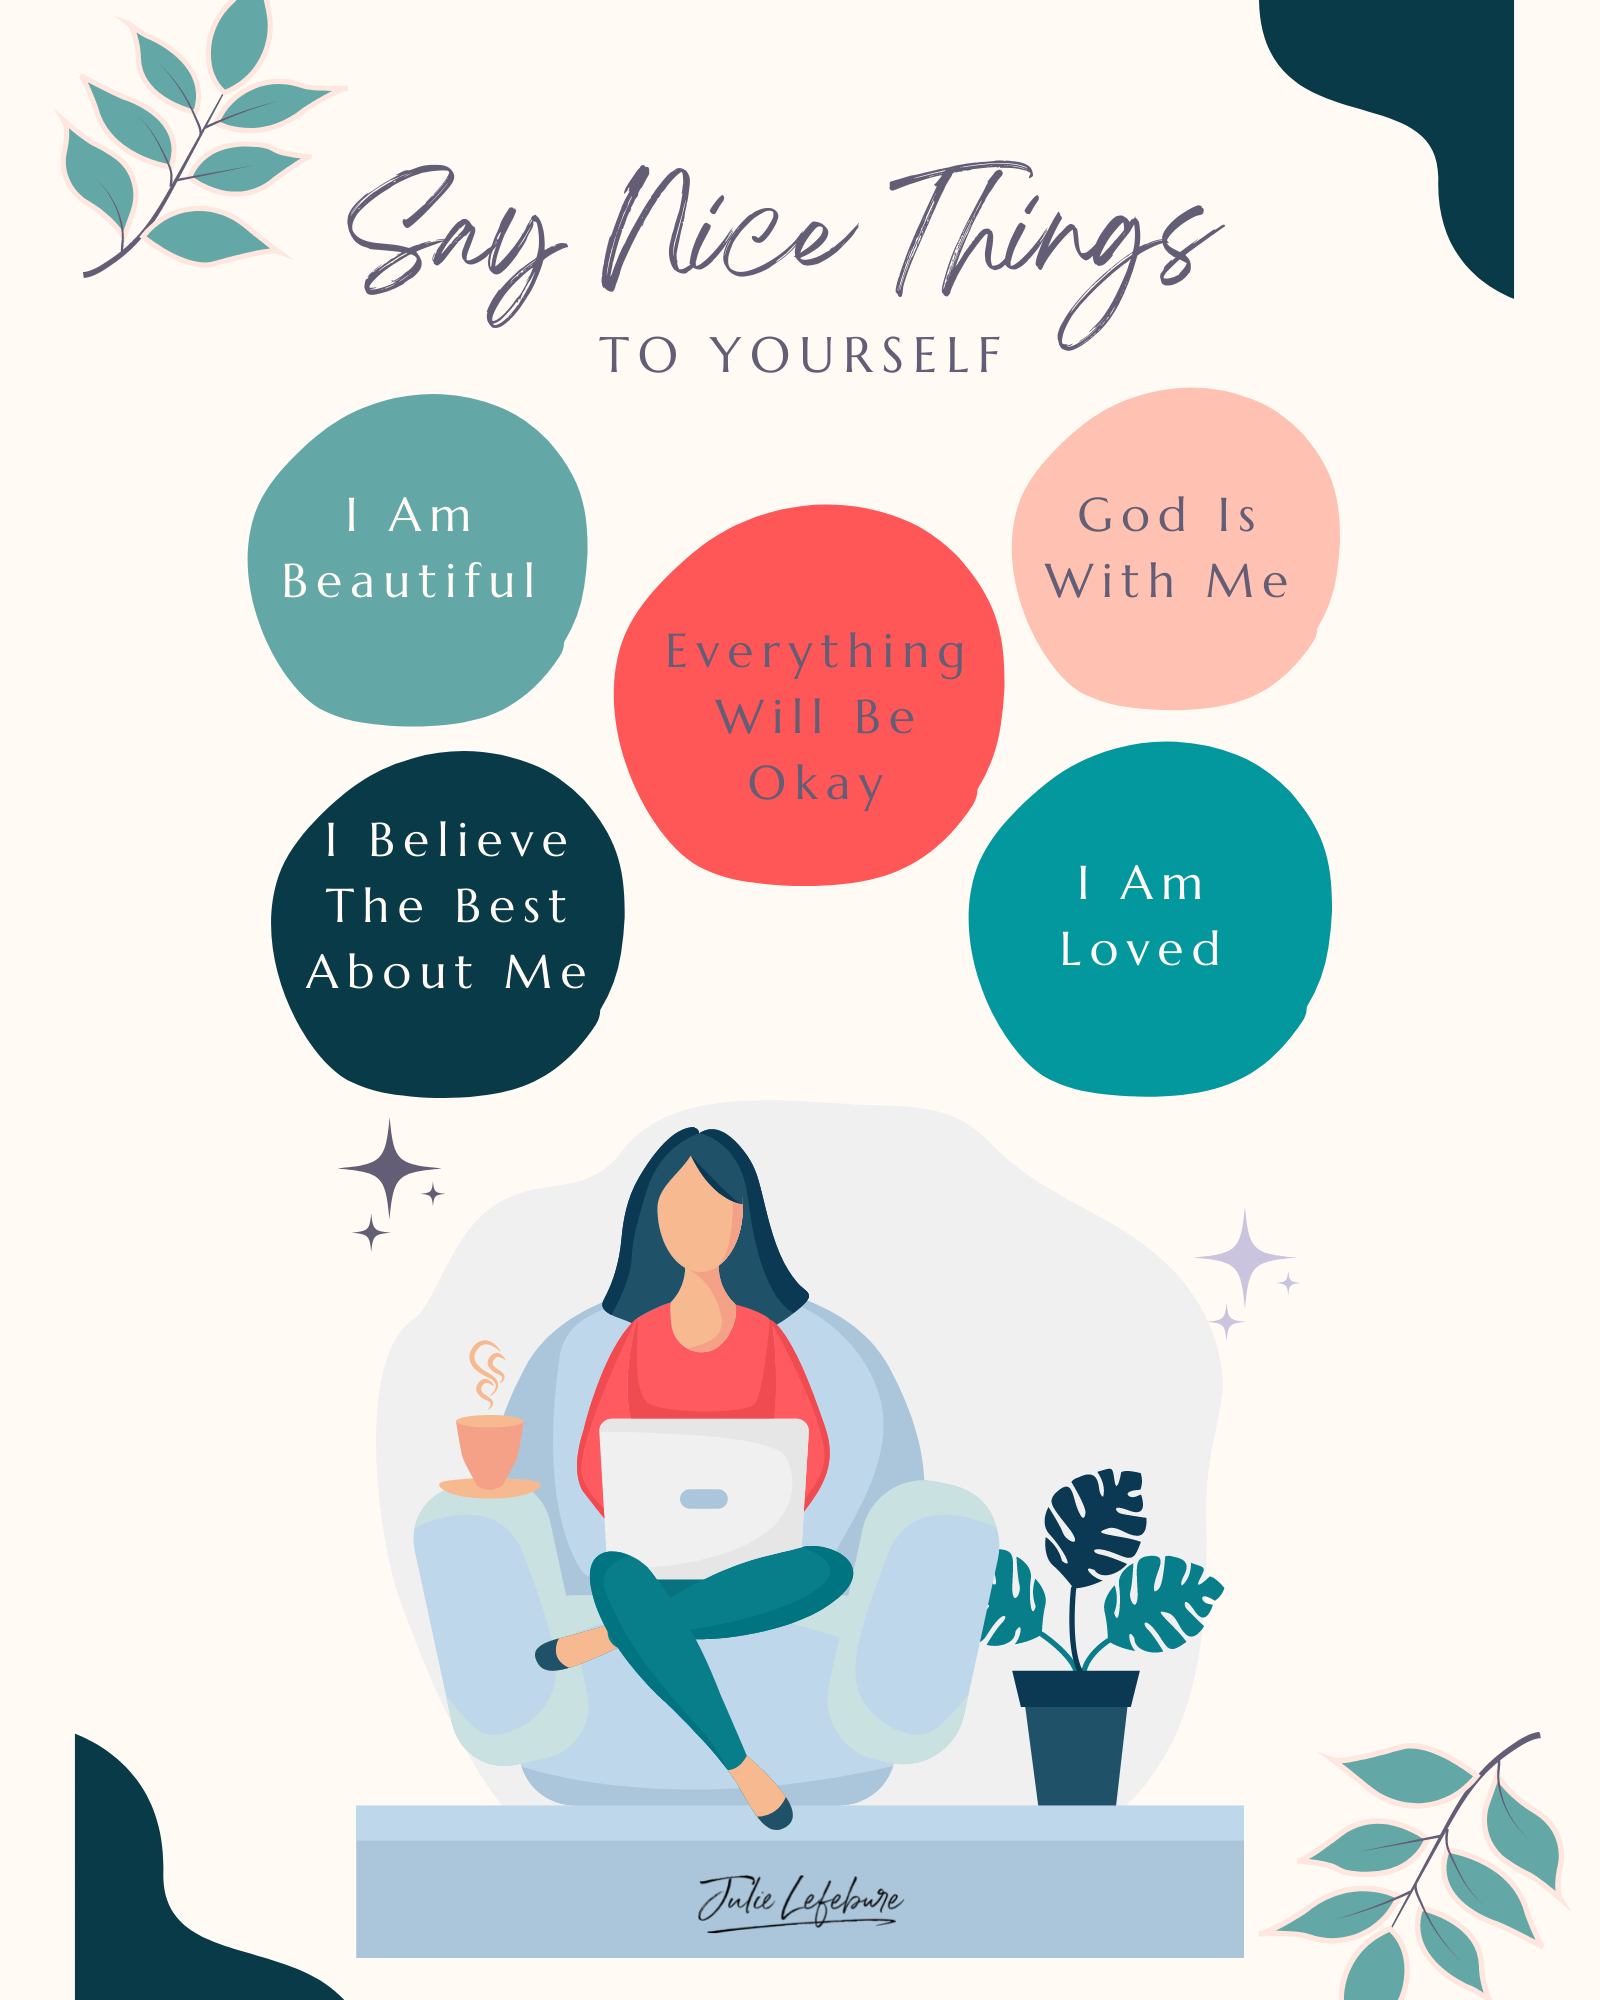 Say Nice Things to Yourself